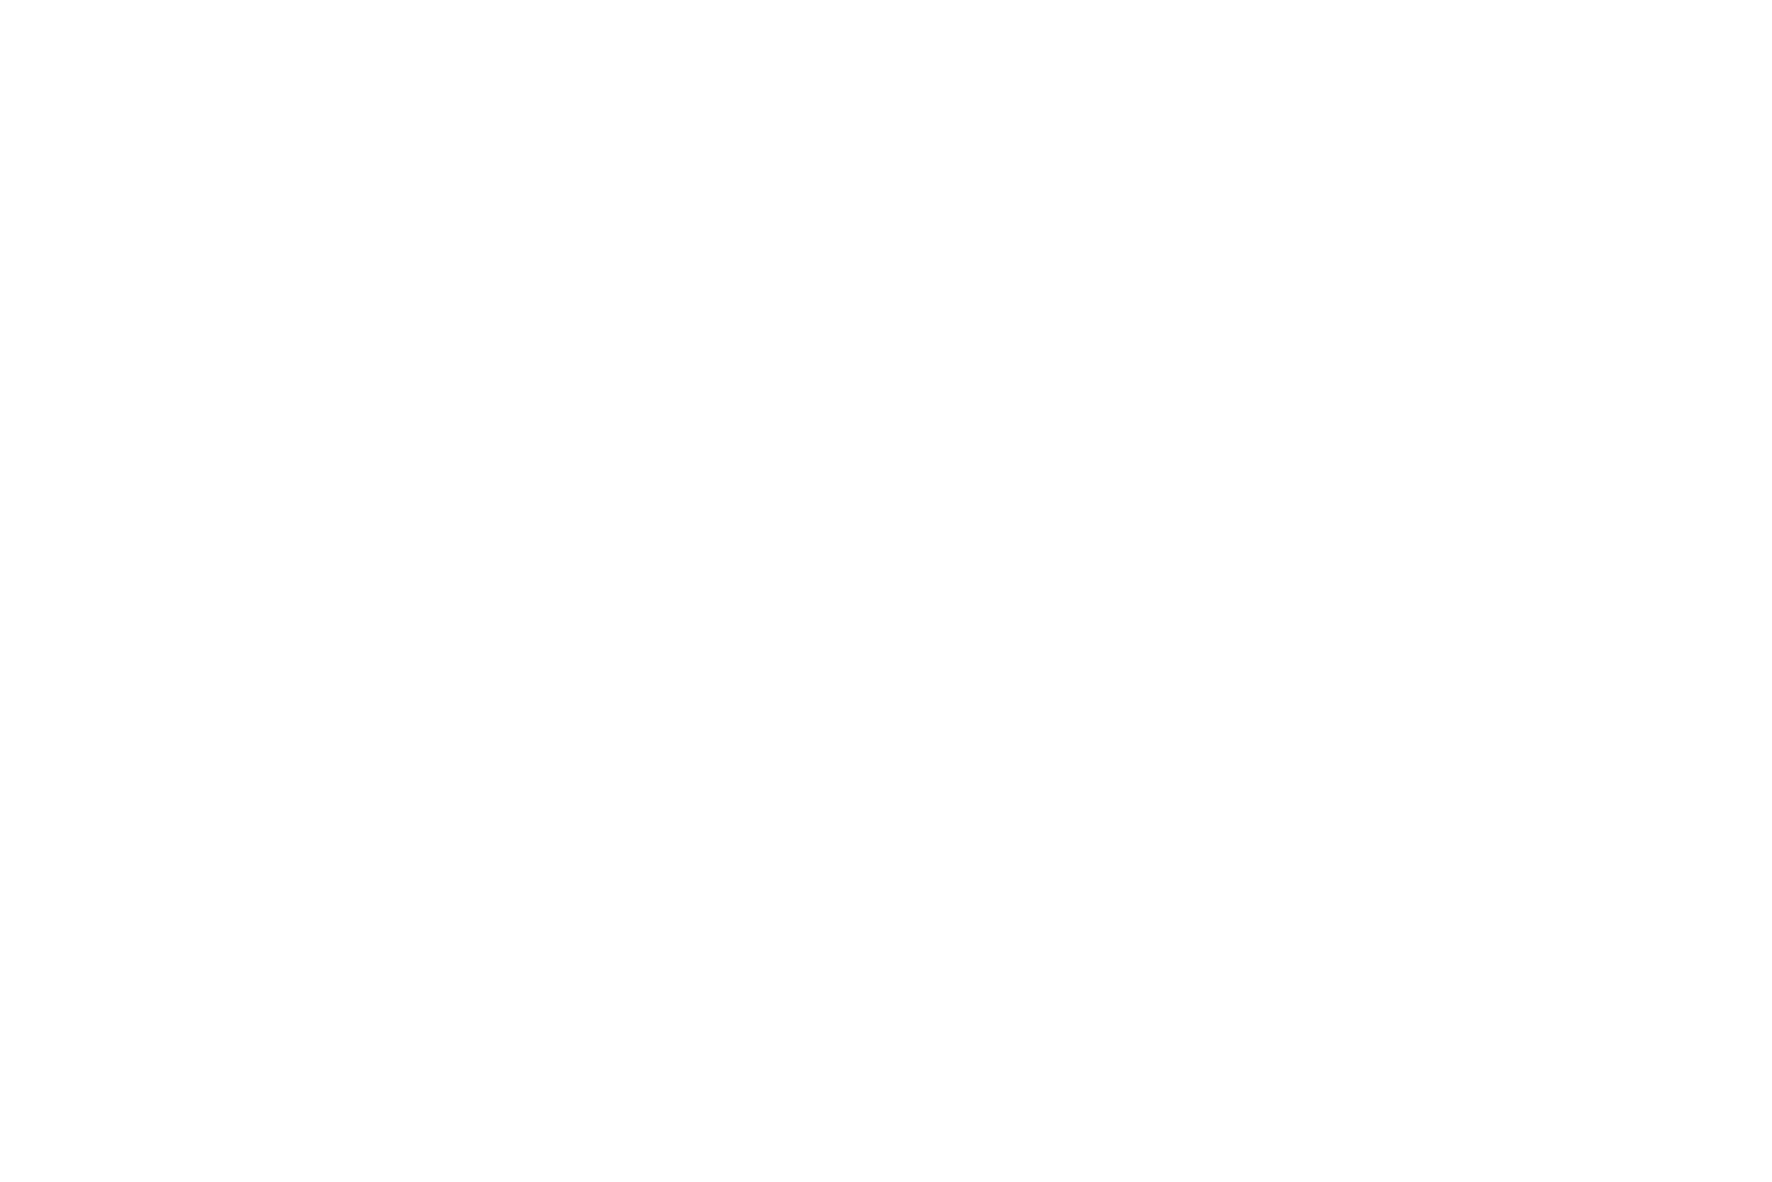 Barcelo Hotels - Digital NEXA Consulting Client